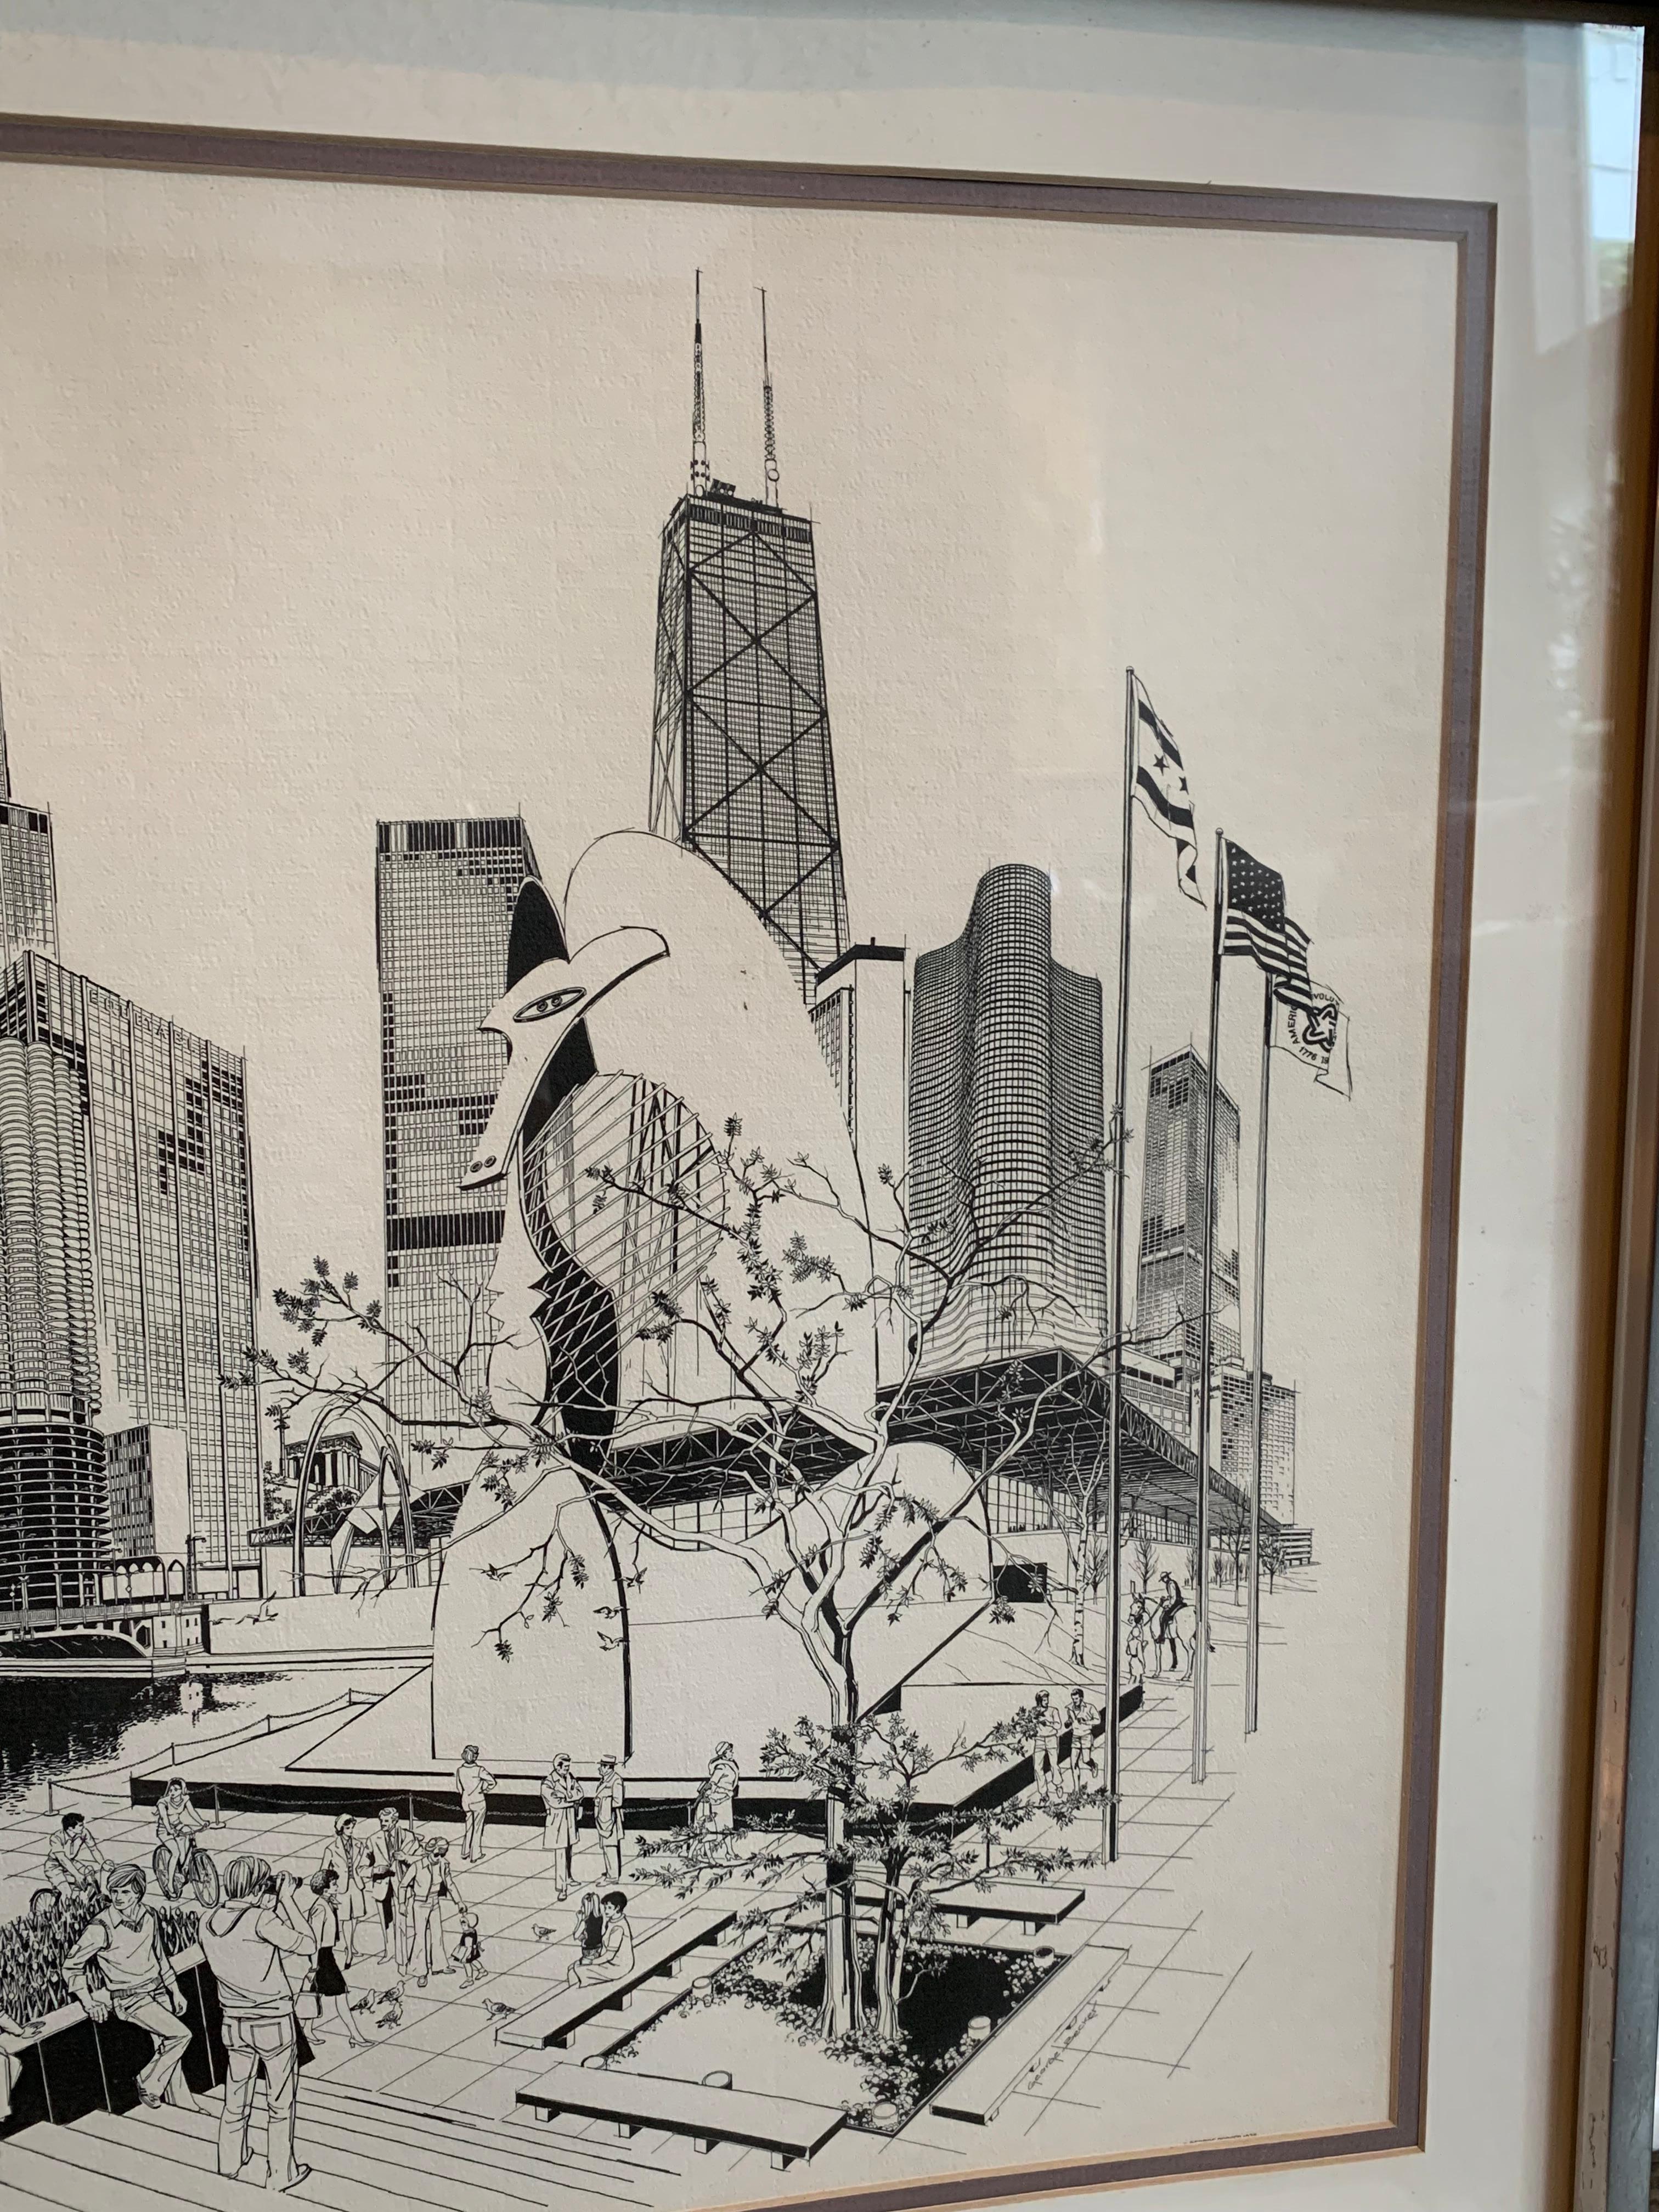 Ink drawing of Chicago Cityscape; with Marina Towers and Picasso Sculpture featured.
iconic 1970's work 
Rare vintage black & white print by George Becker called 